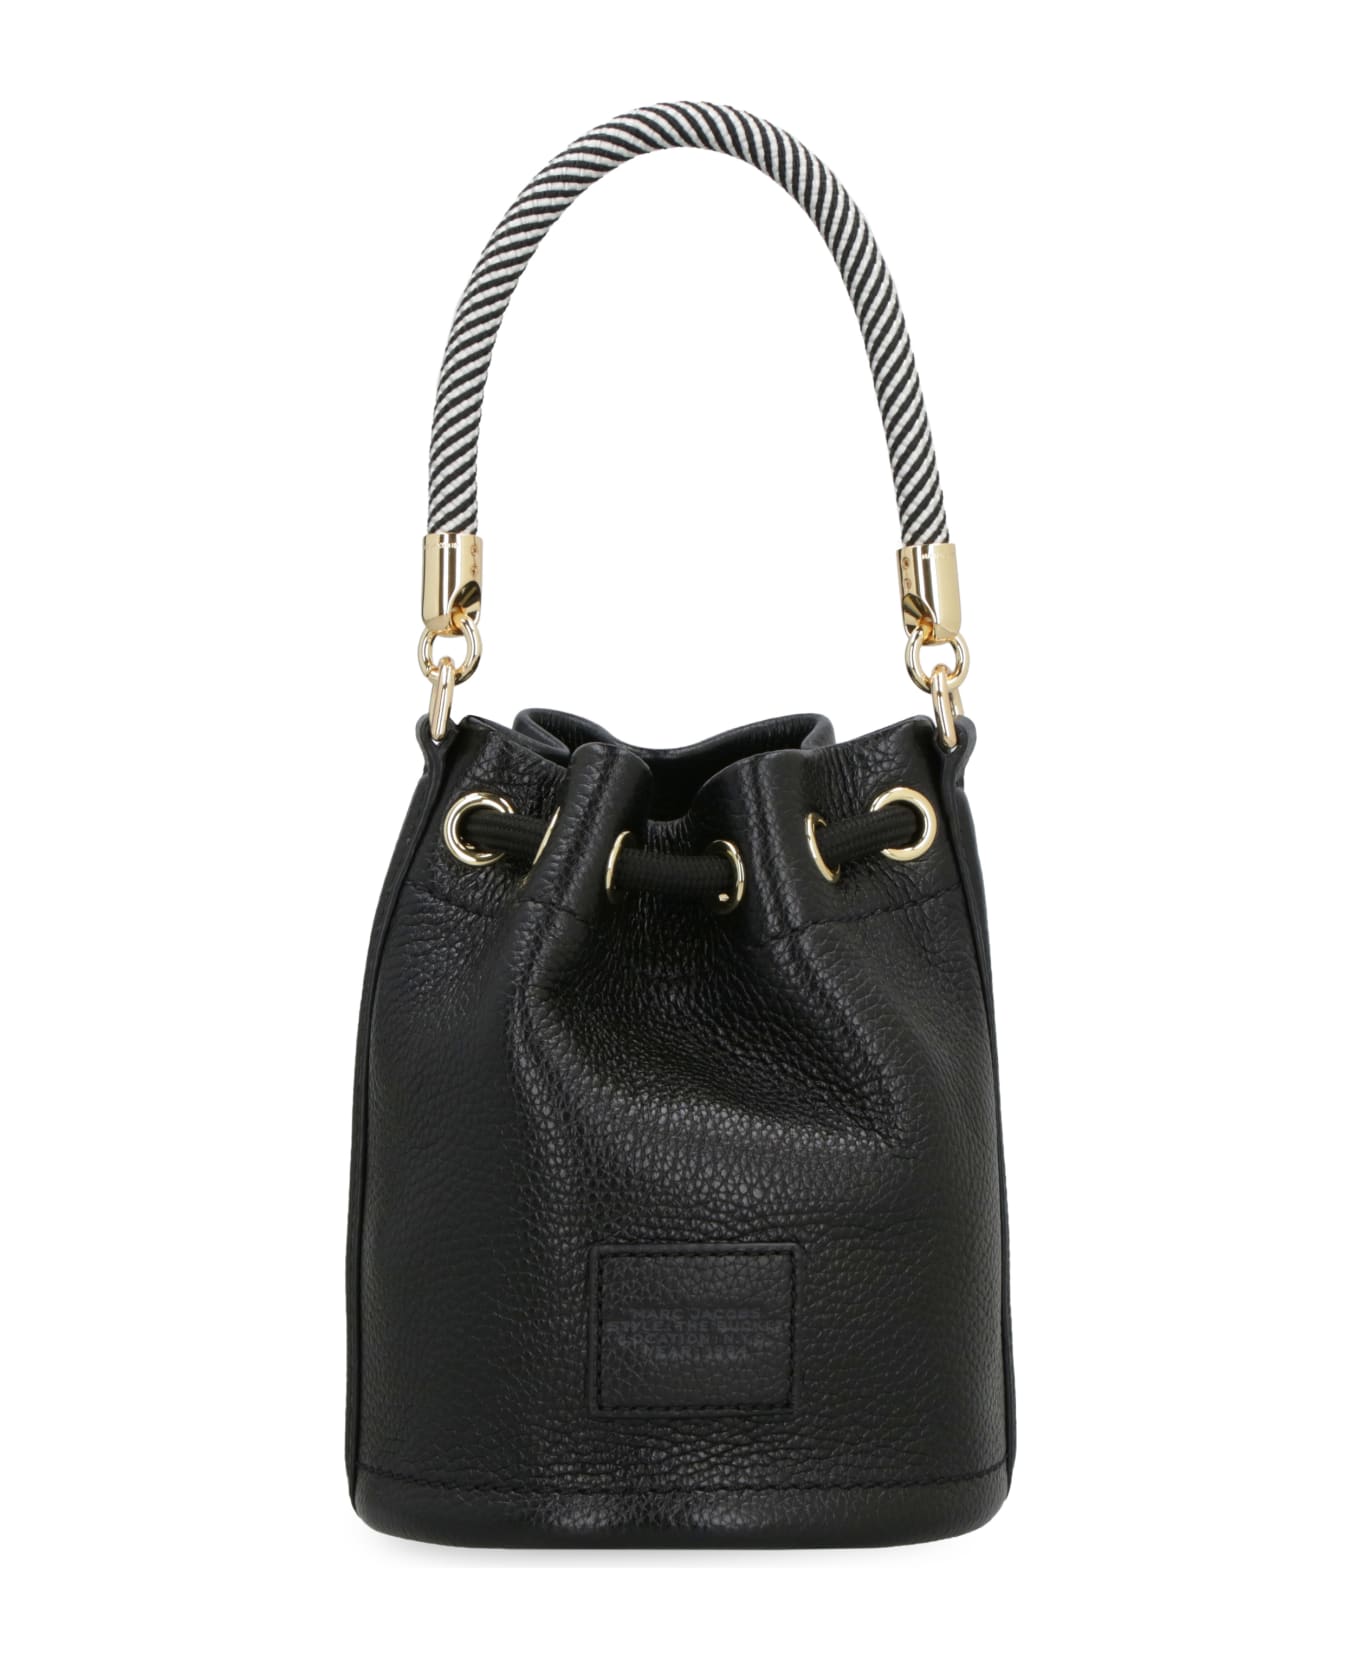 Marc Jacobs The Leather Micro Bucket Bag - black トートバッグ